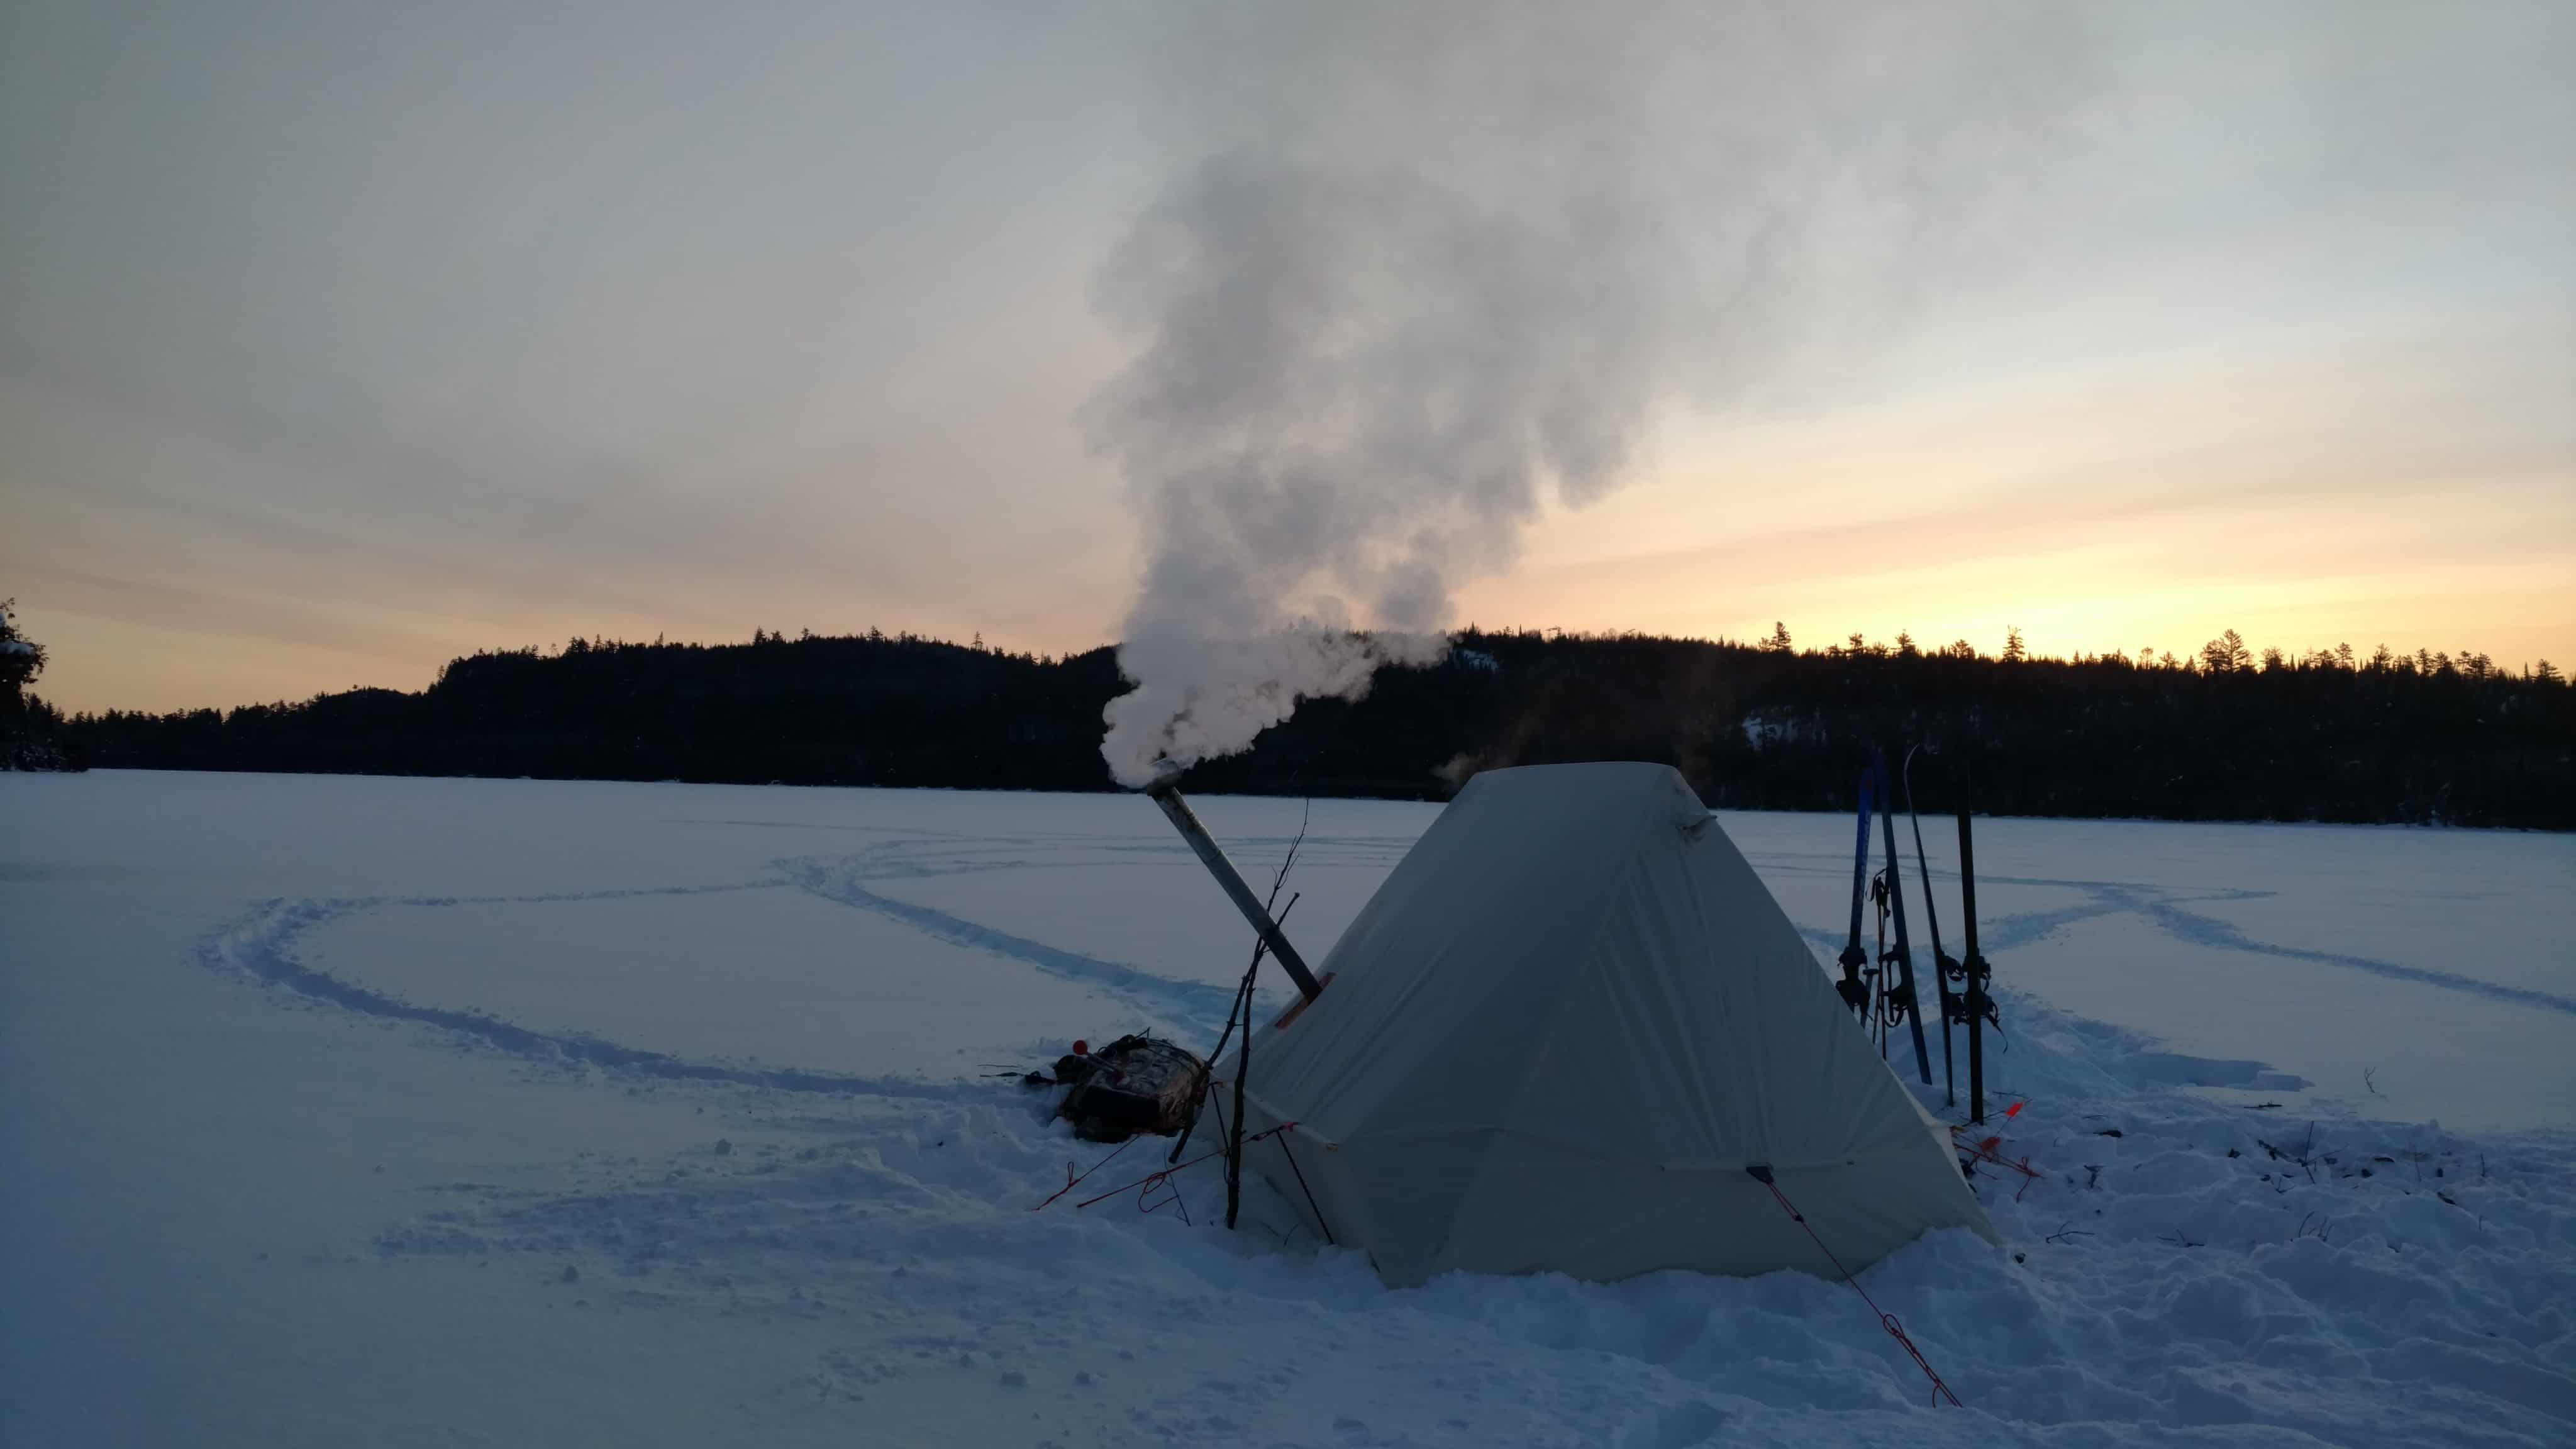 How to Camp in Extreme Cold